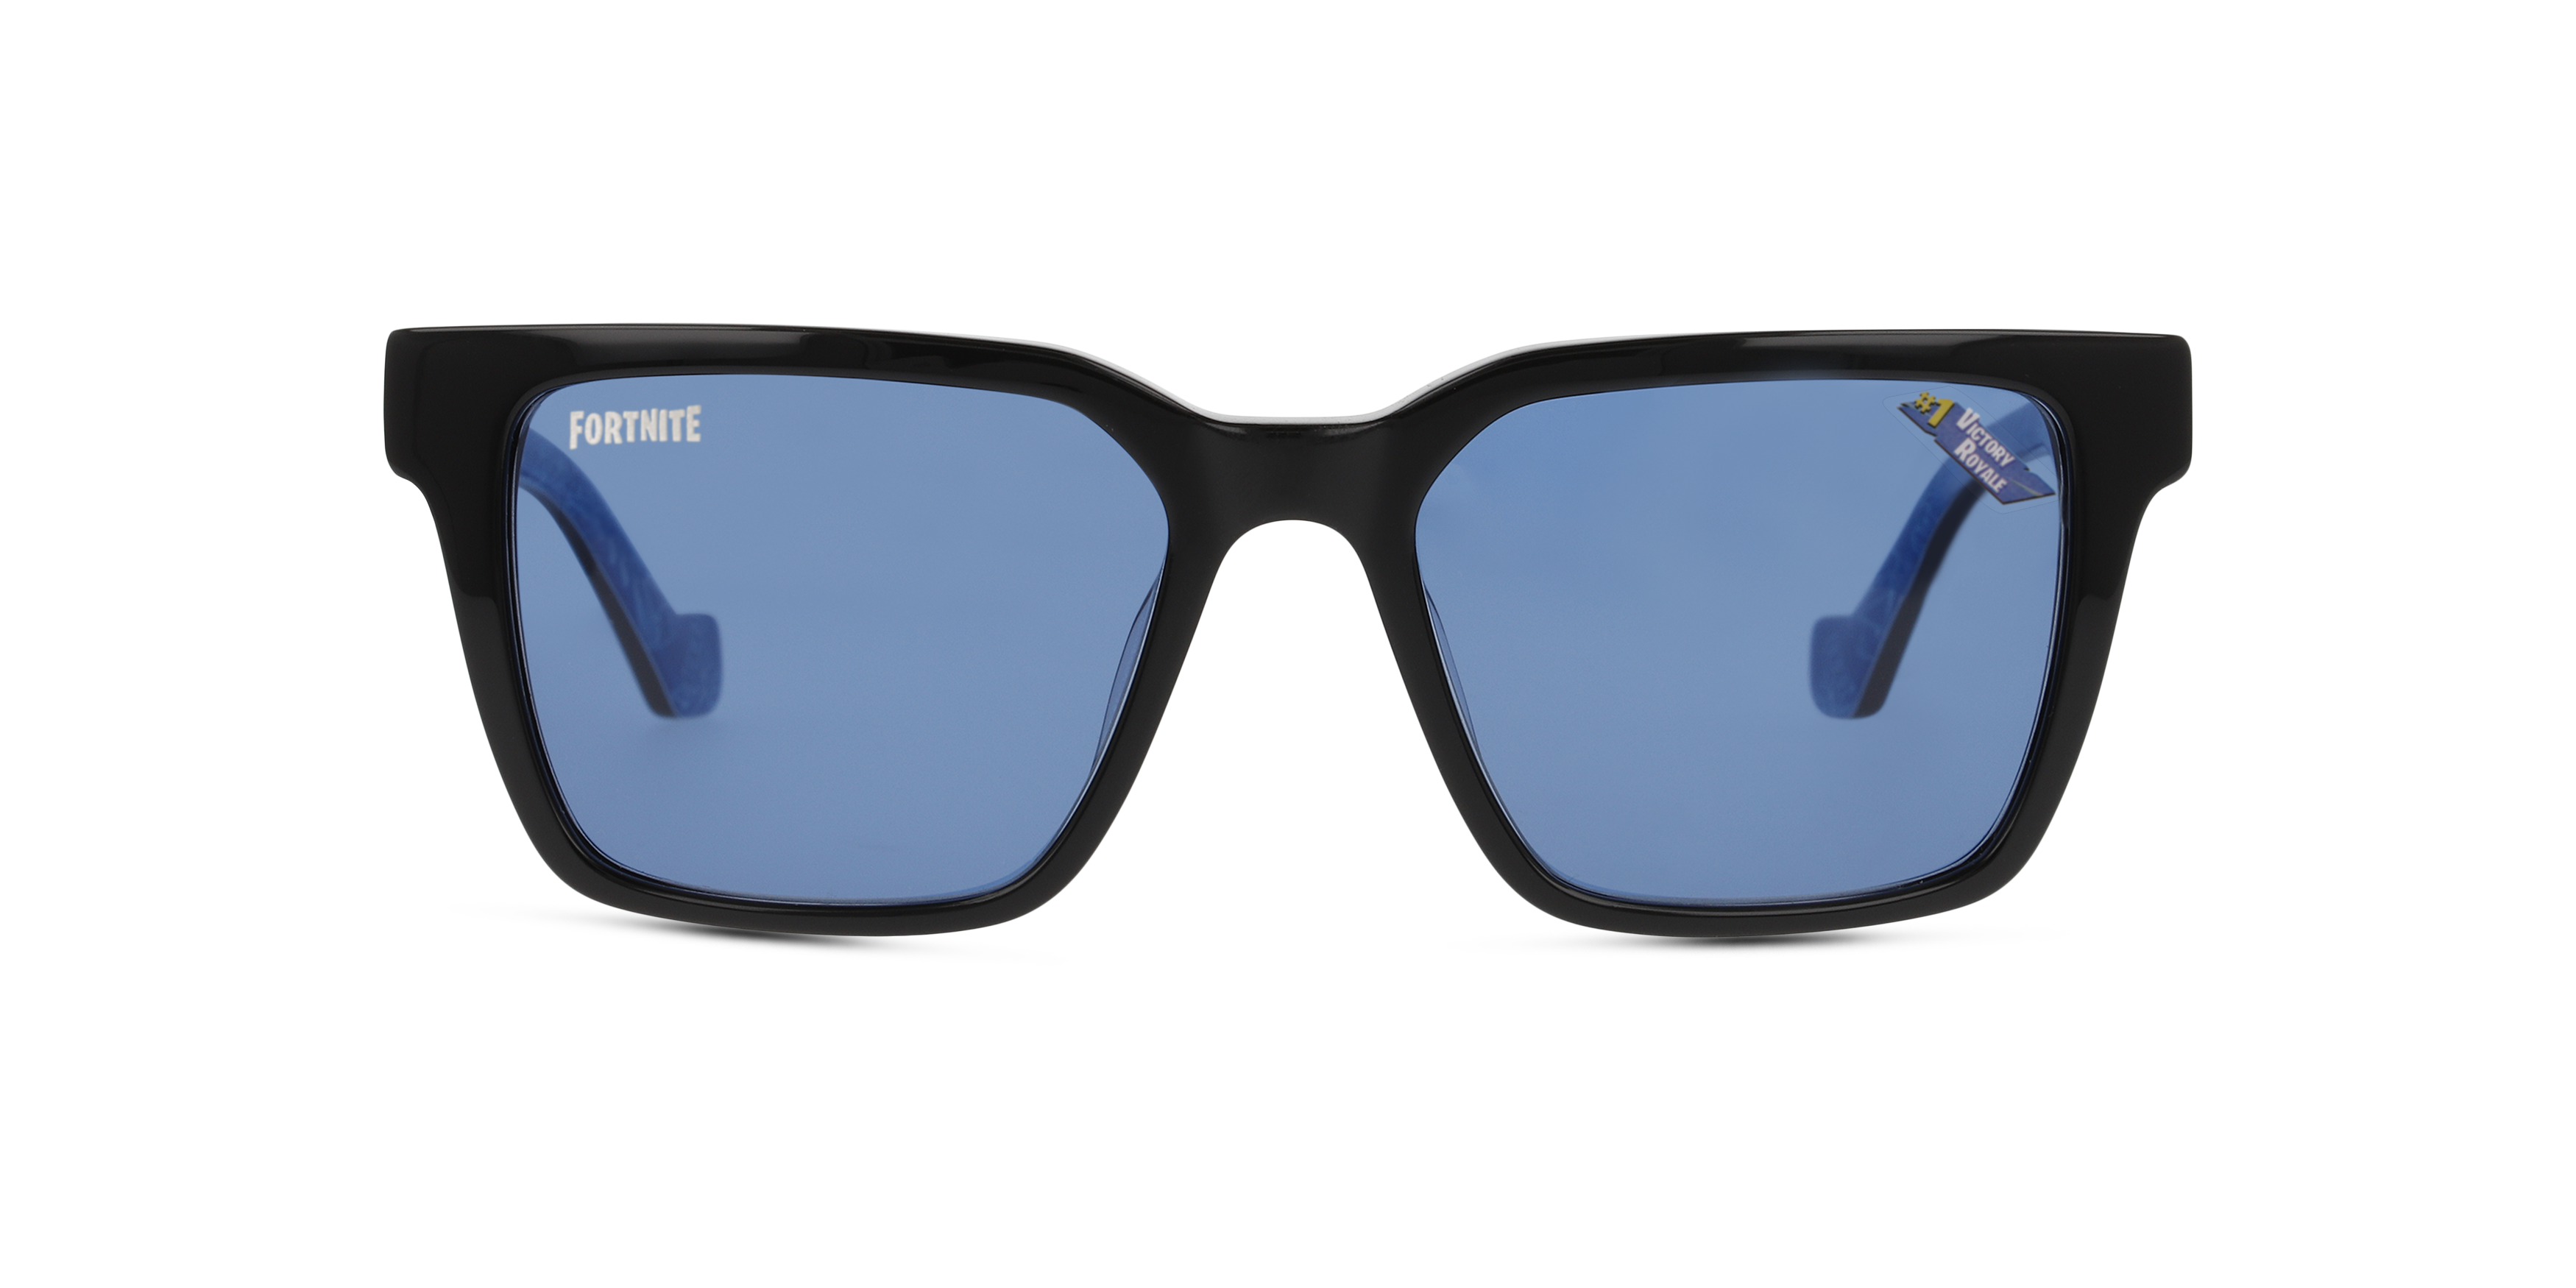 Front Fortnite with Unofficial UNSU0128 Sunglasses Blue / Black